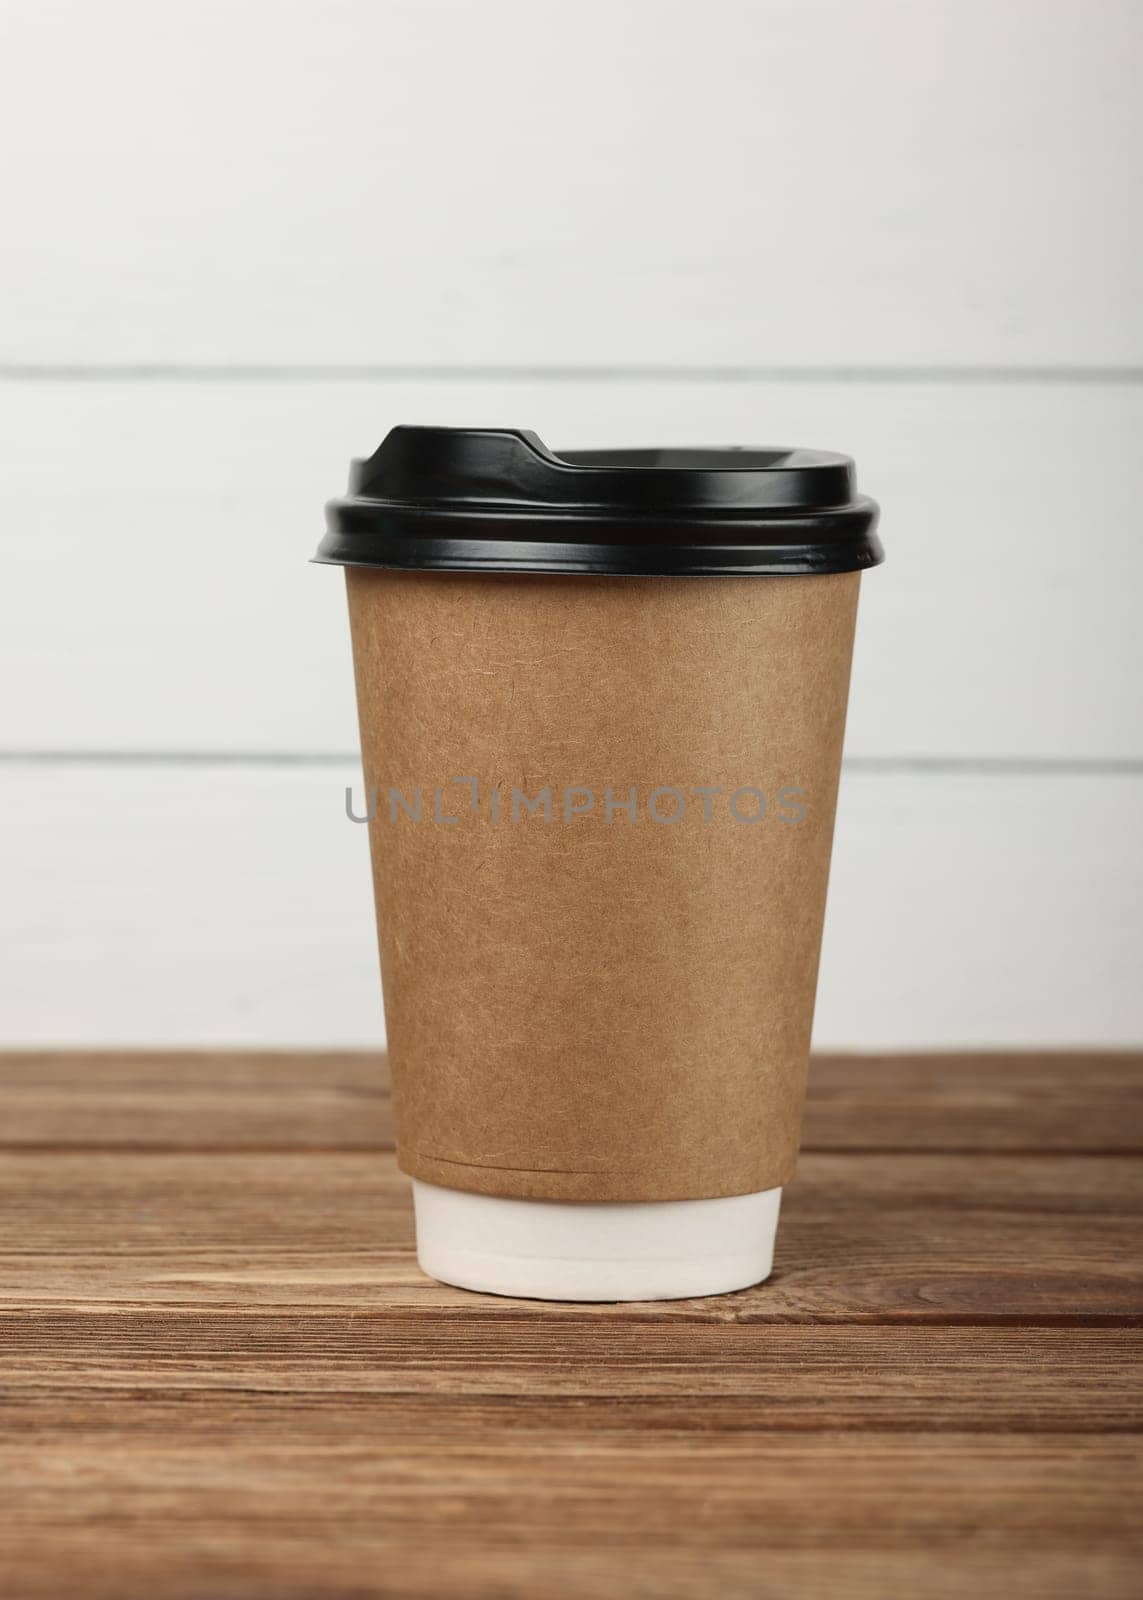 Close up brown paper coffee cup over white wooden painted wall at coffee shop retail display